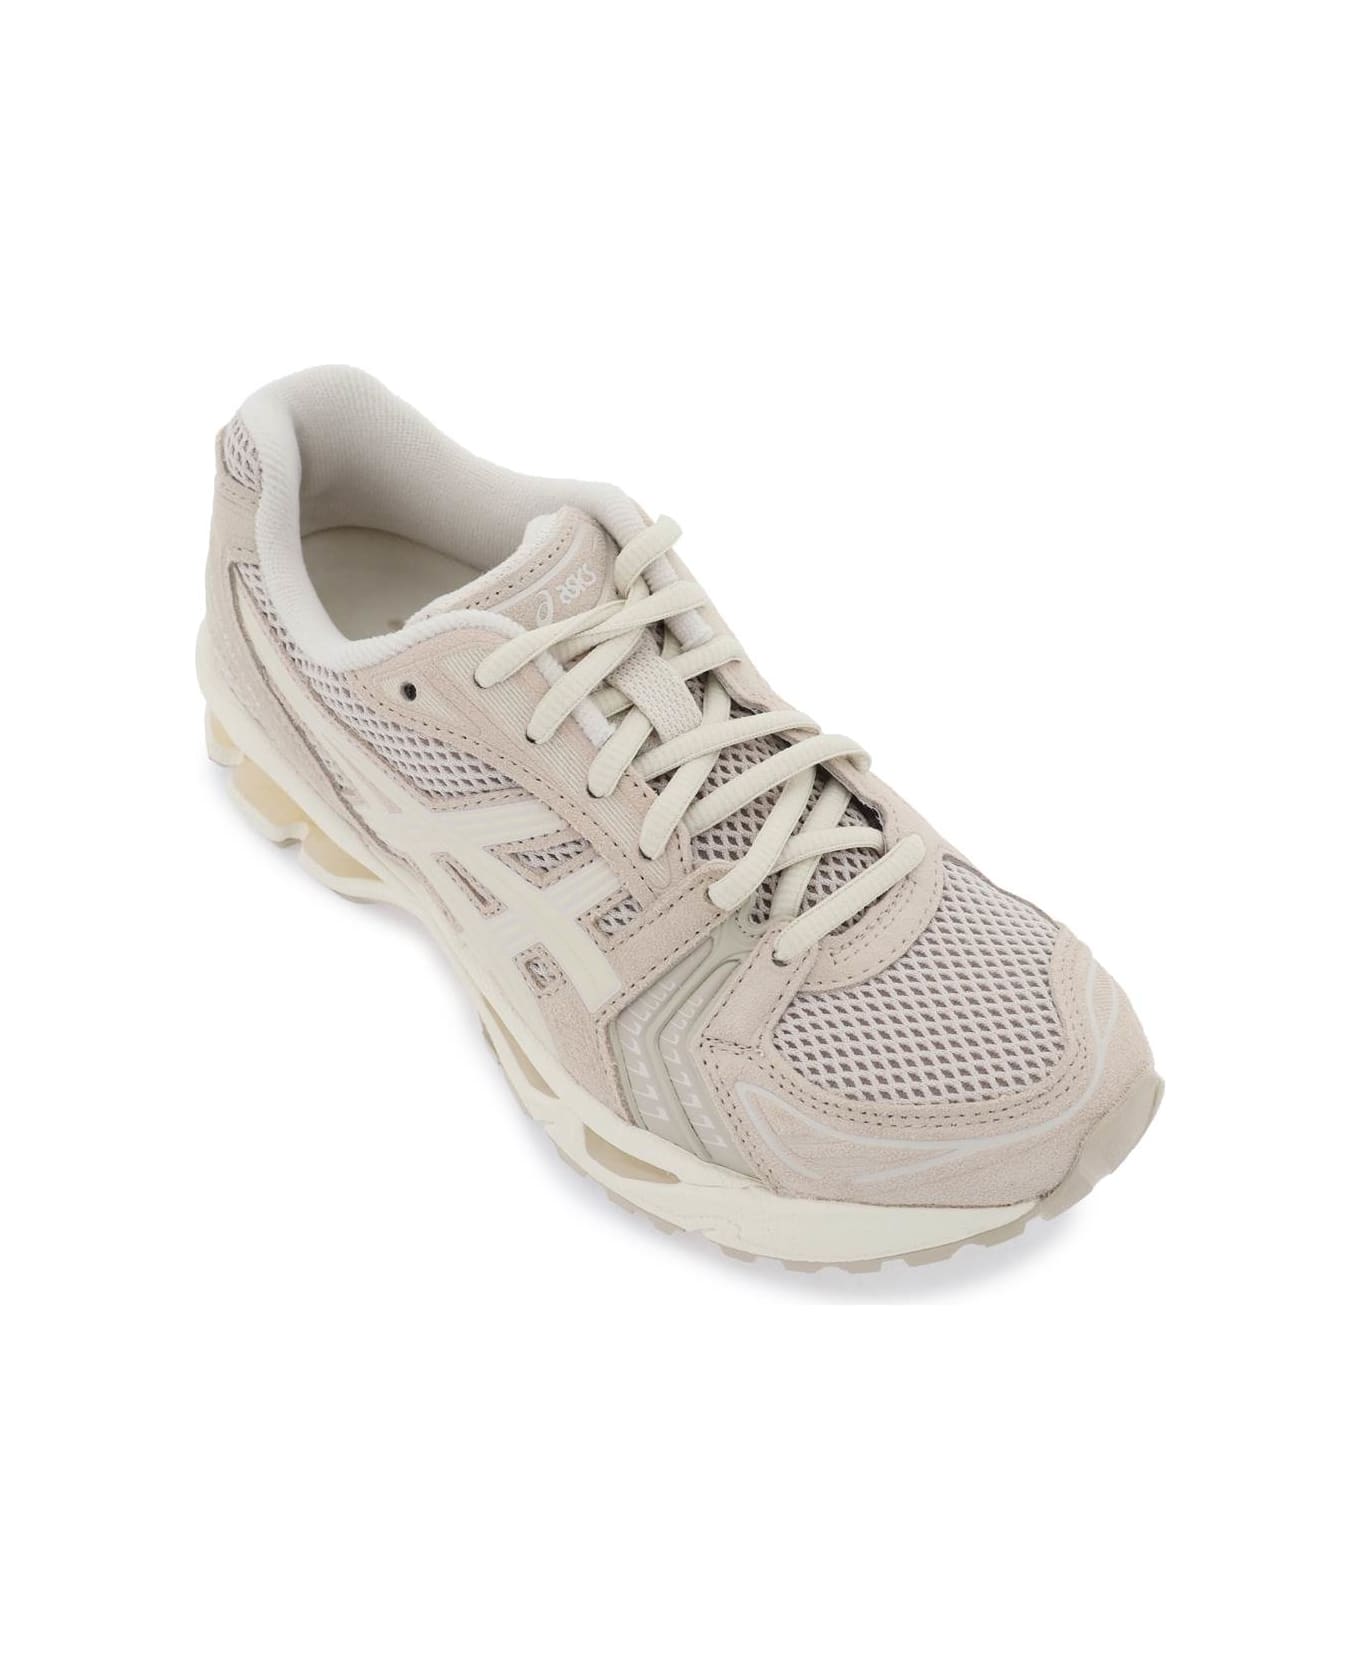 Asics Gel-kayano 14 Sneakers - SIMPLY TAUPE OATMEAL (Beige)